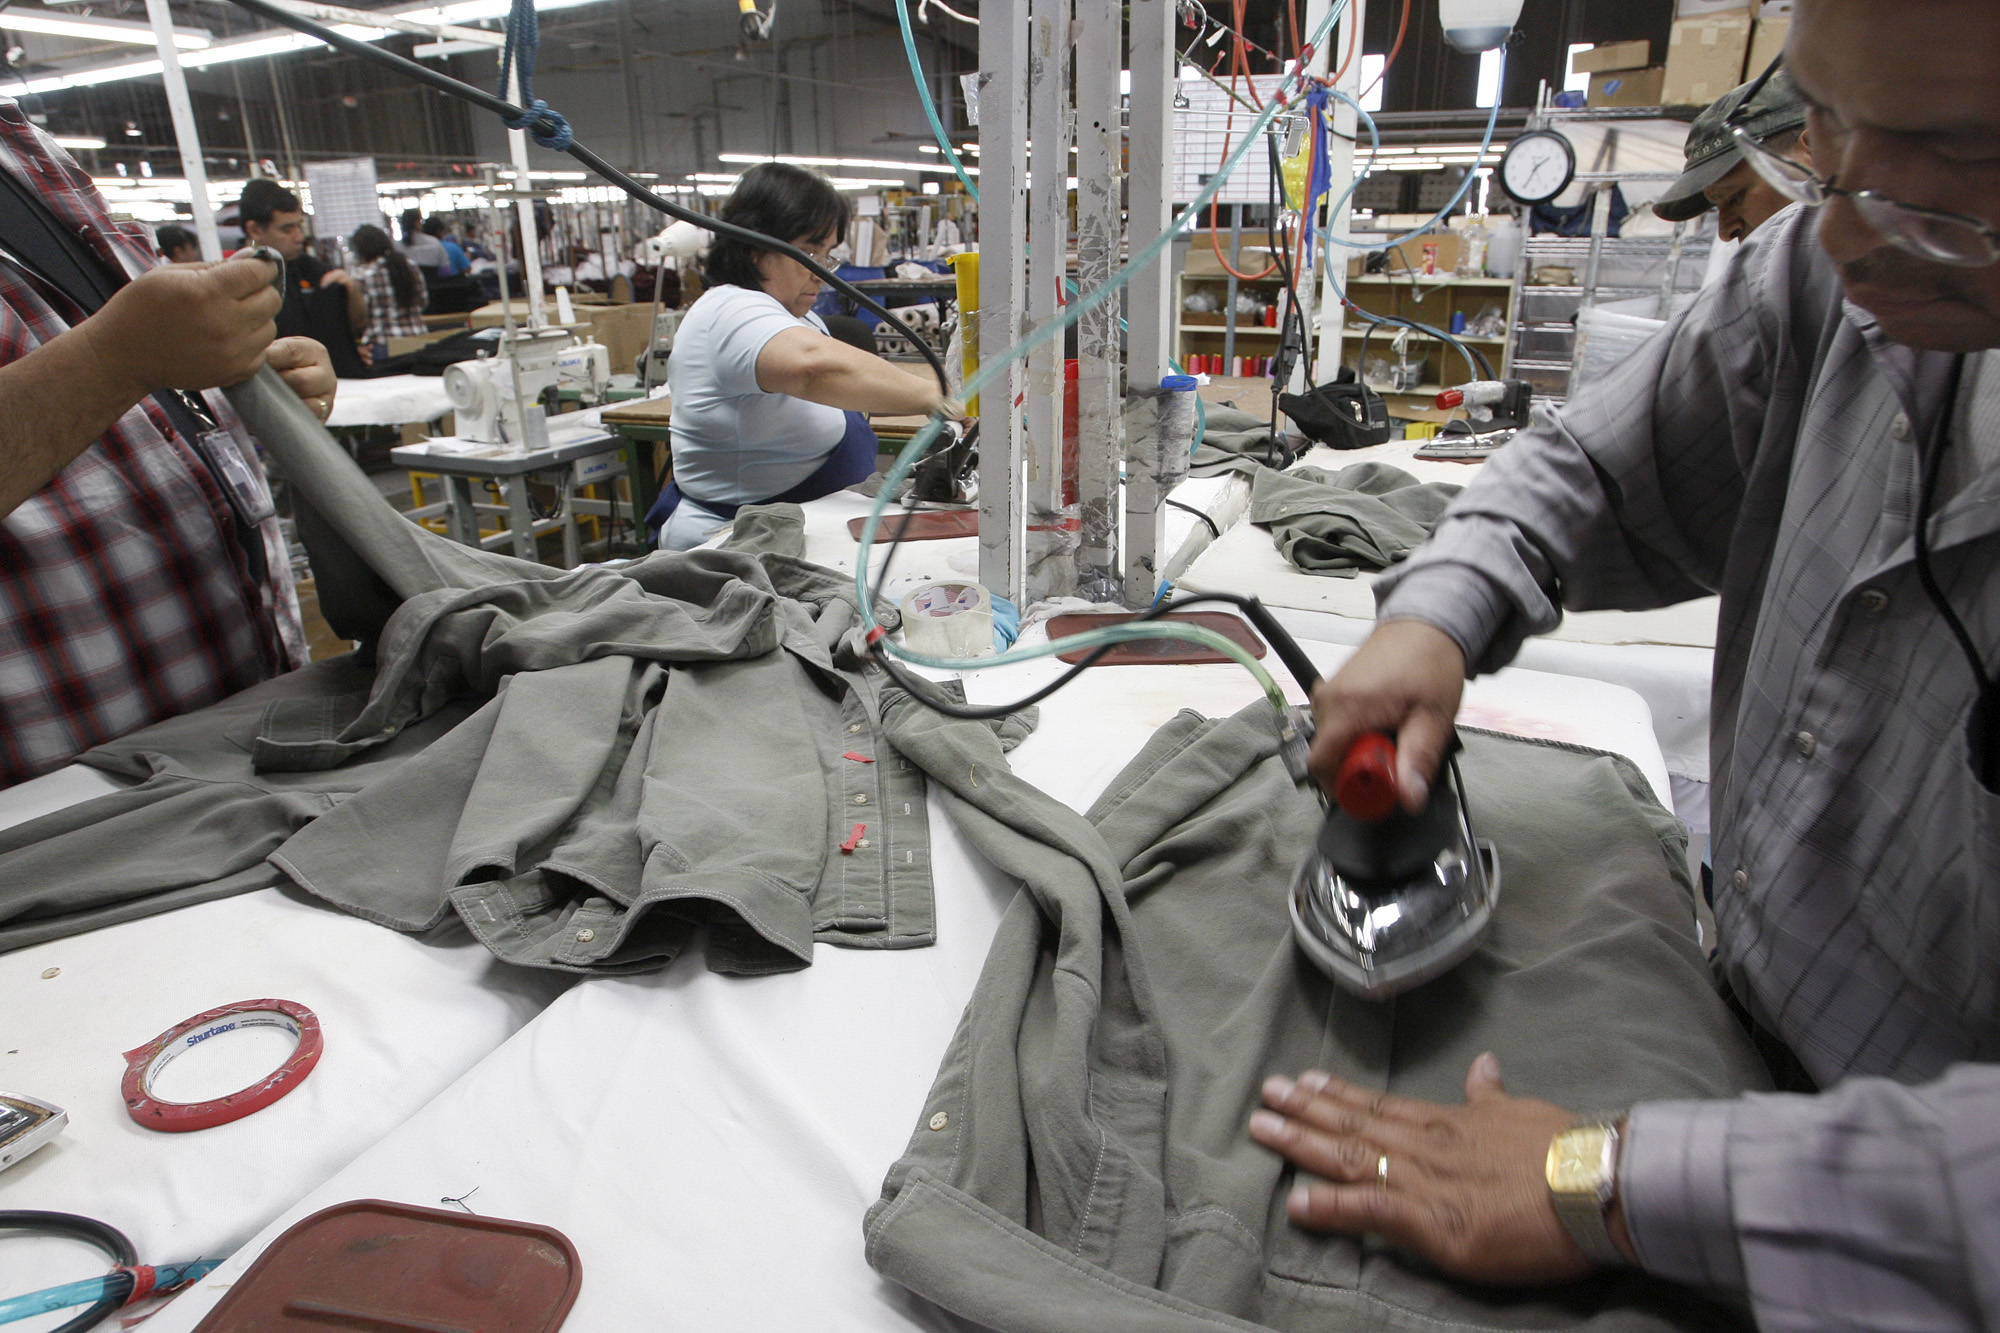 Dov Charney's Los Angeles Apparel Offers Up Factory Workforce for Mask  Production to Combat Coronavirus